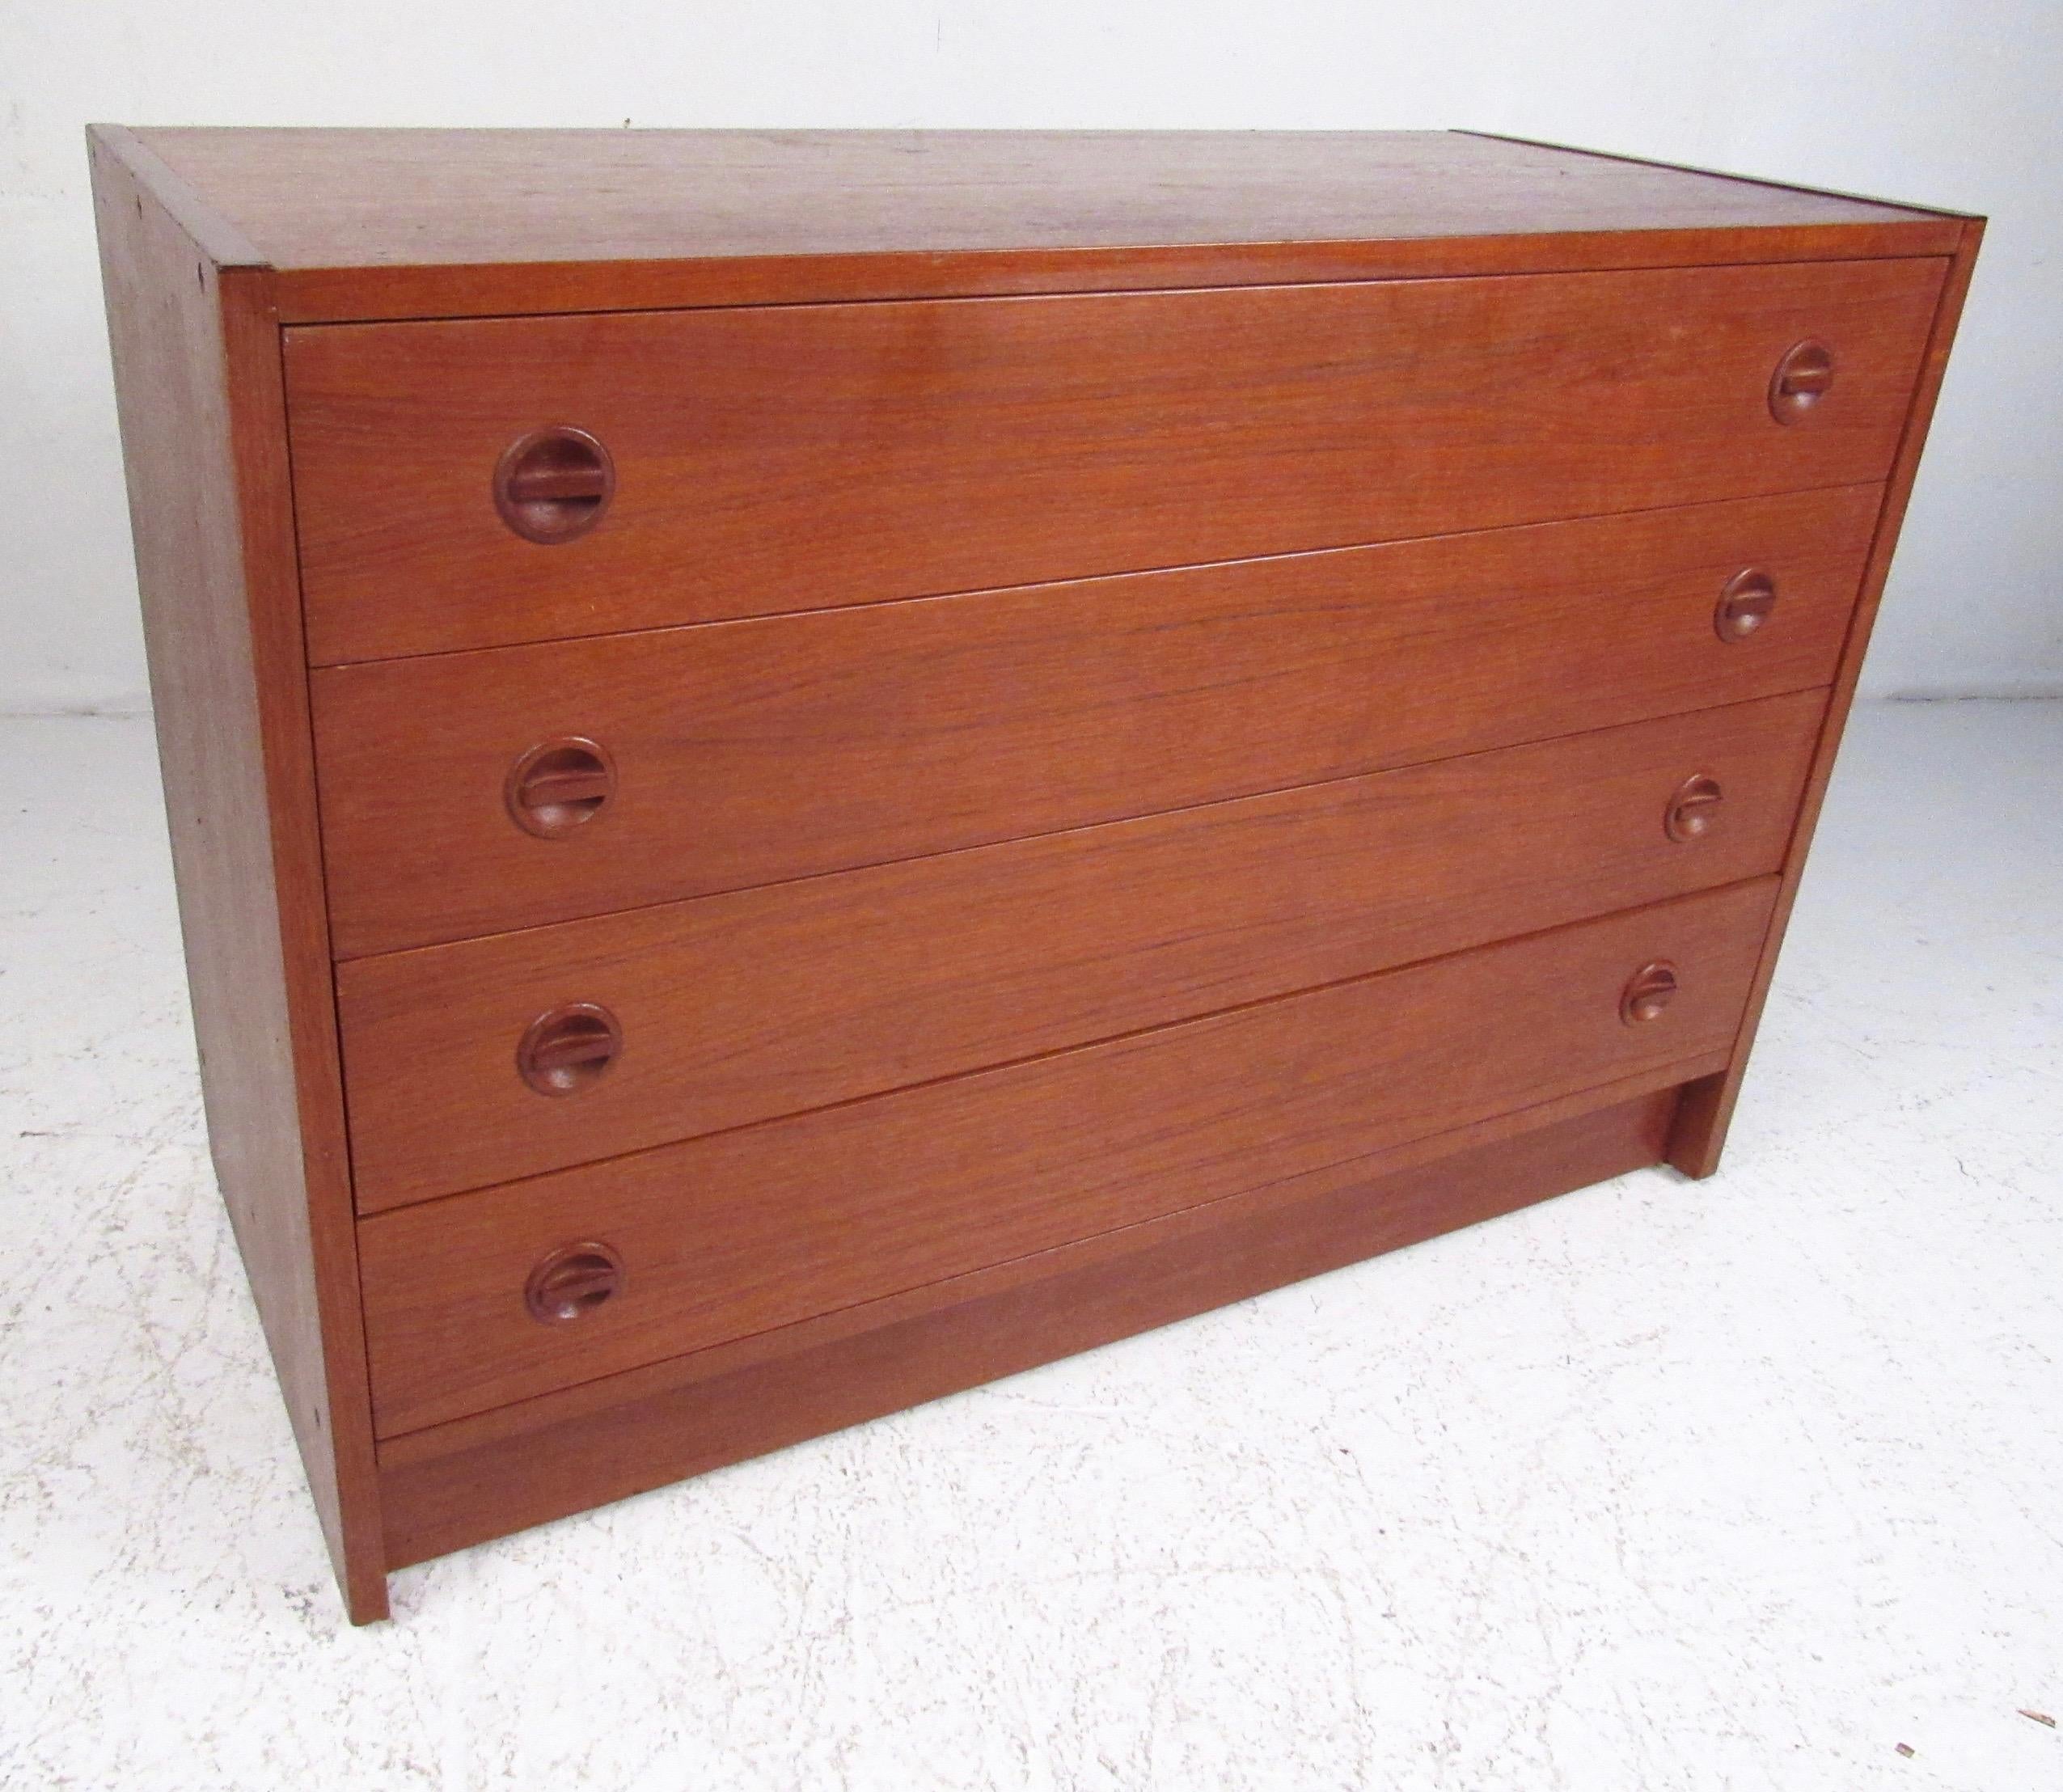 This vintage modern four-drawer dresser features rich Scandinavian teak finish complete with carved wood pulls. Spacious chest of drawers perfect for bedroom storage. Mid-Century Modern charm and Danish manufacturing make this ideal for home or